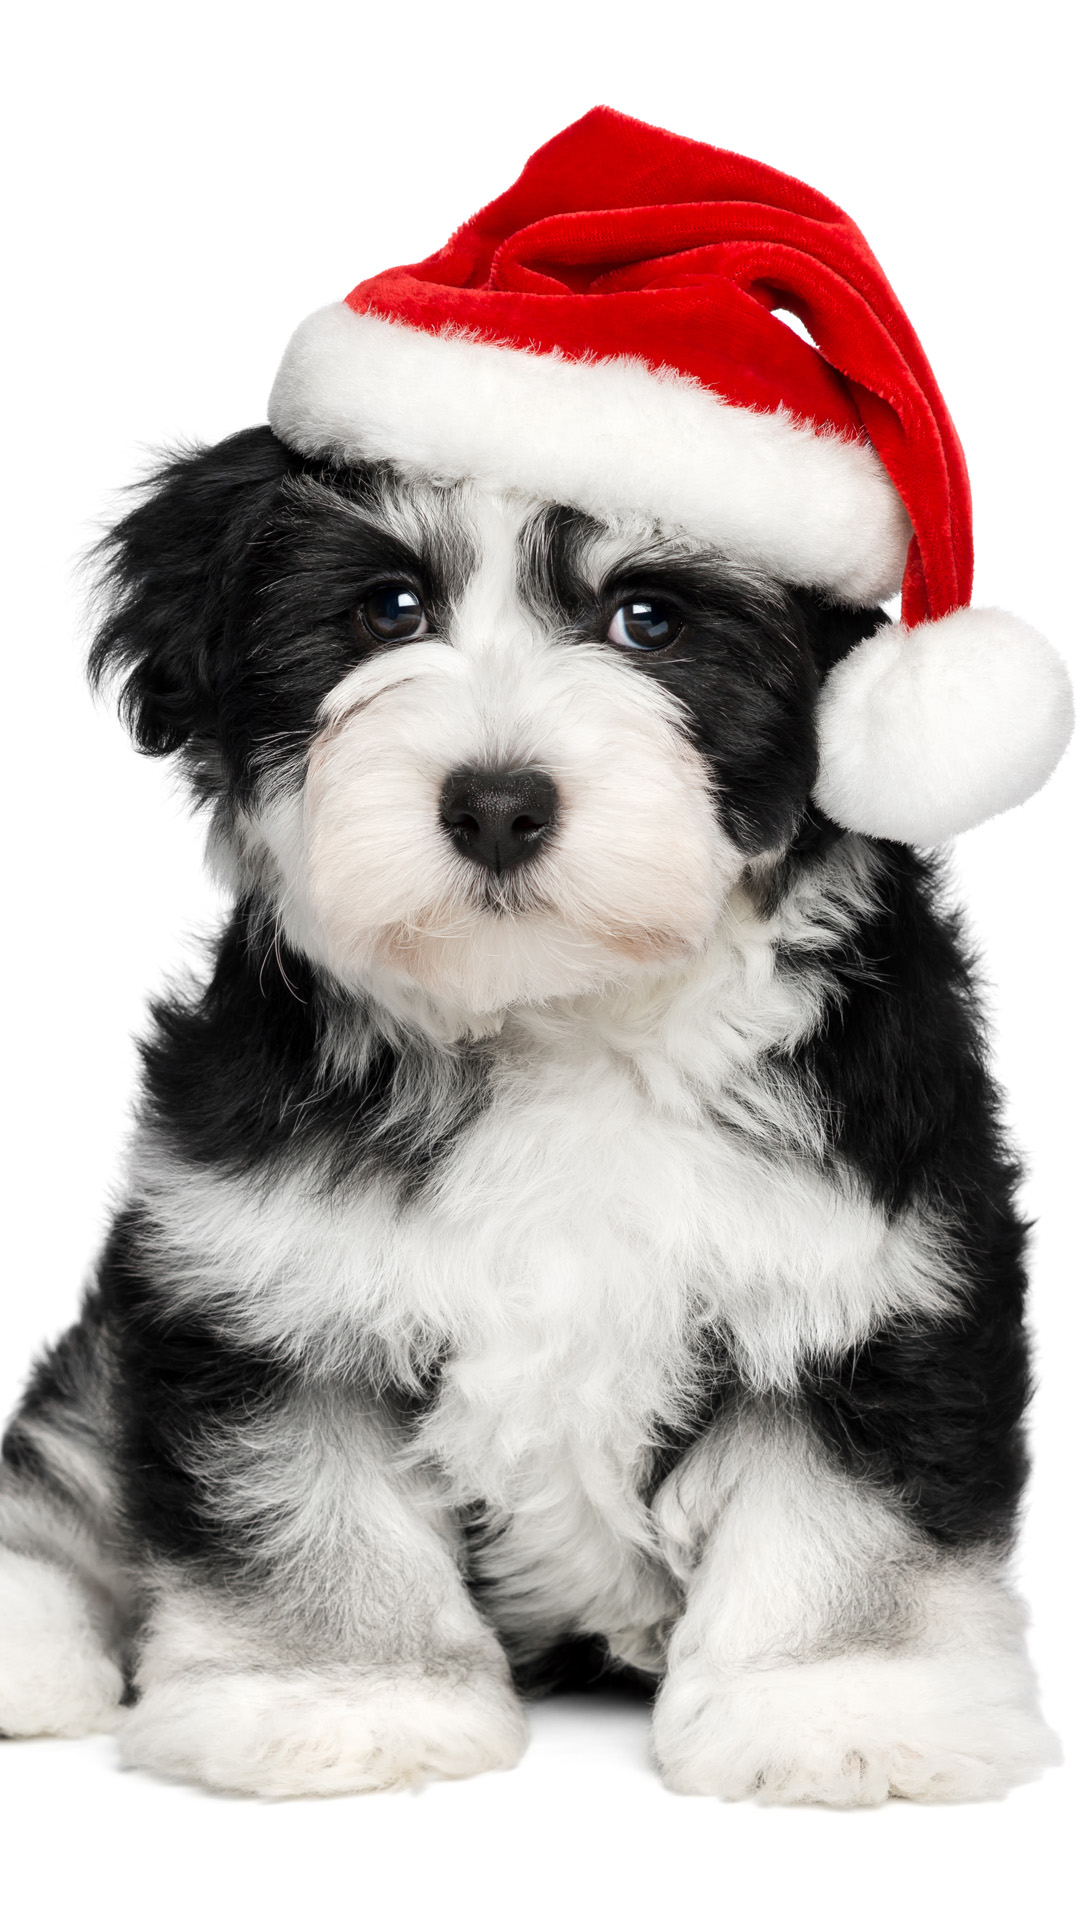  Christmas dog iphone 6 plus wallpaper iPhone 6 Plus Wallpapers HD